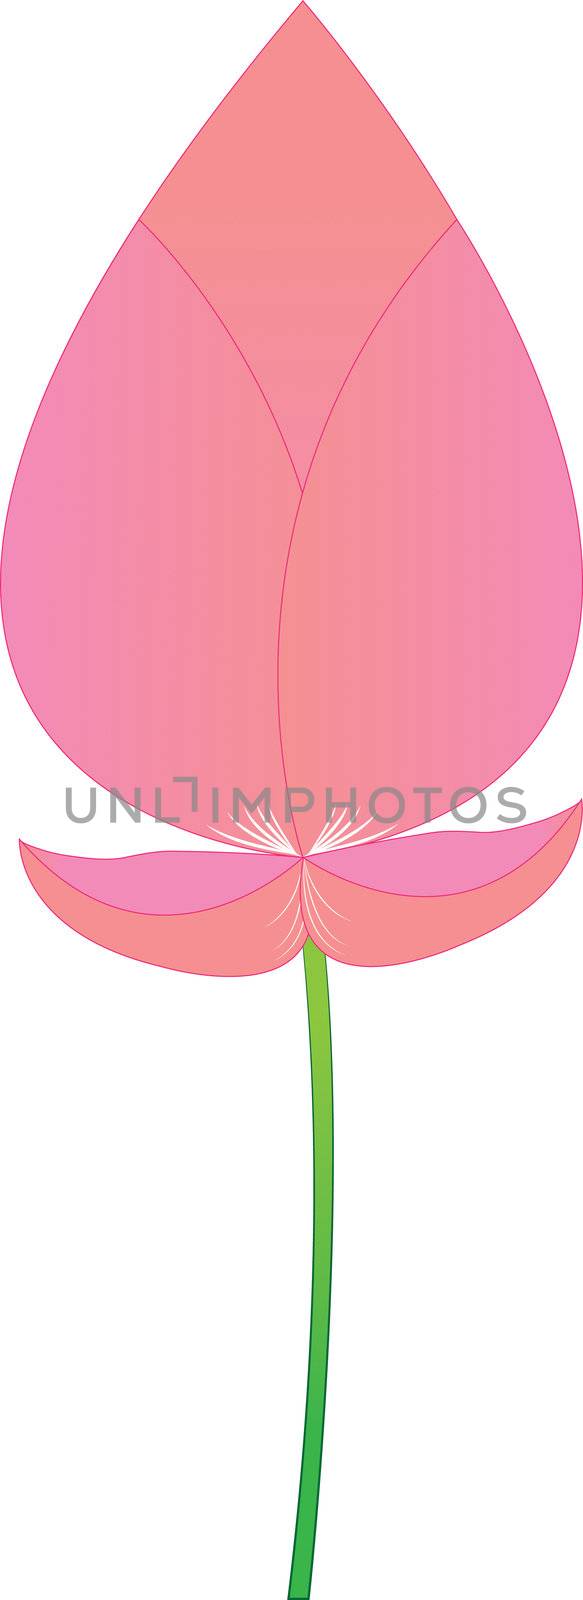 Pink lotus boom on a white background. by kurapy